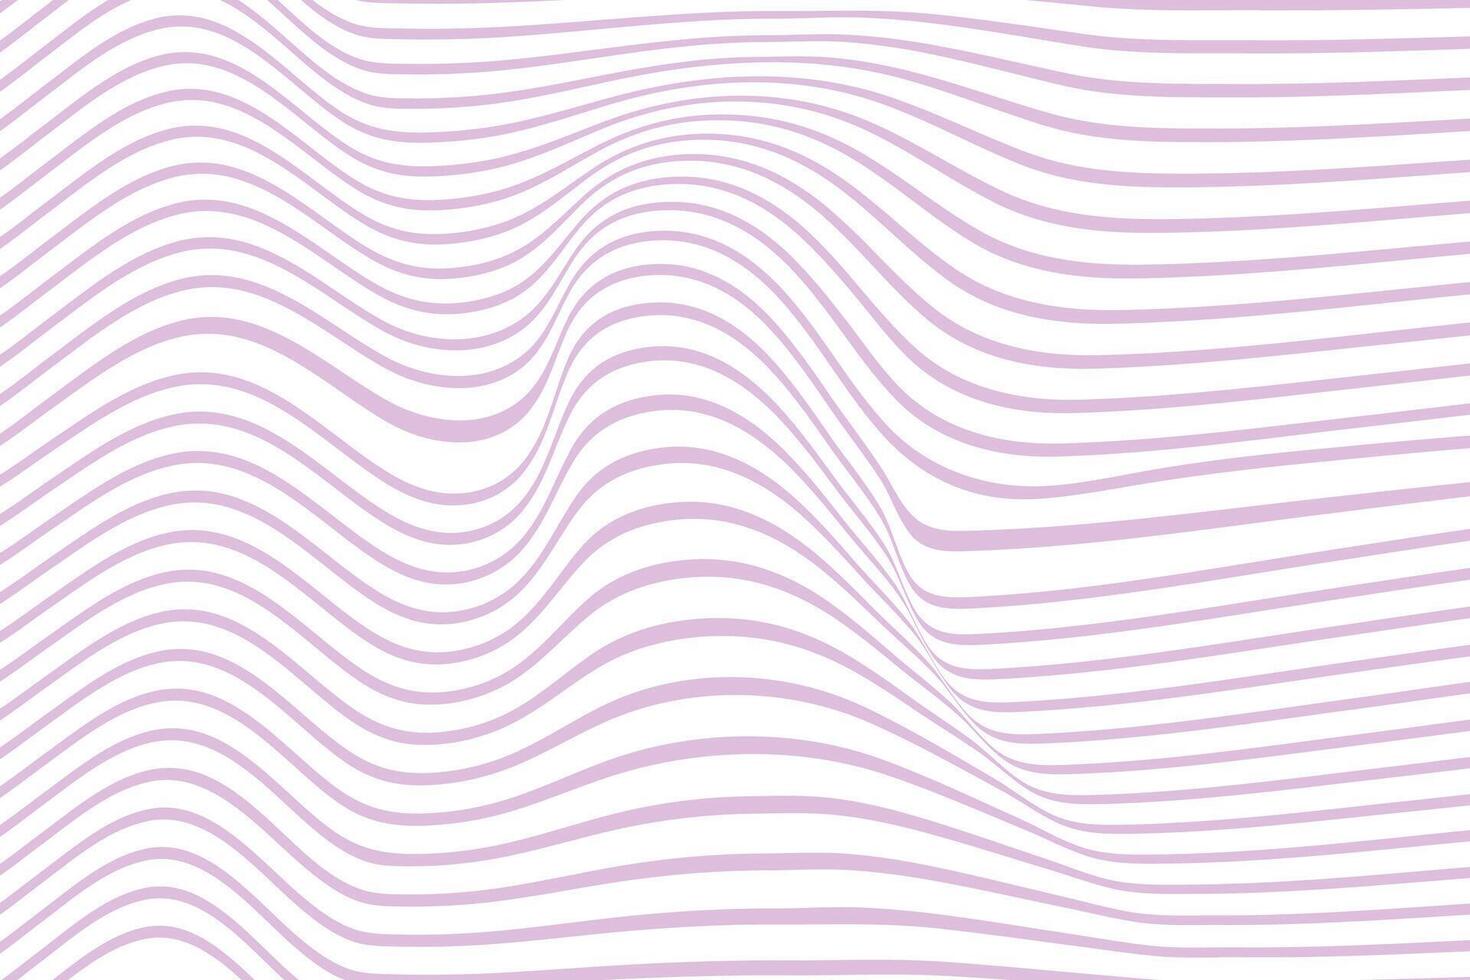 Distorted wave monochrome texture.purple and white wavy background. vector